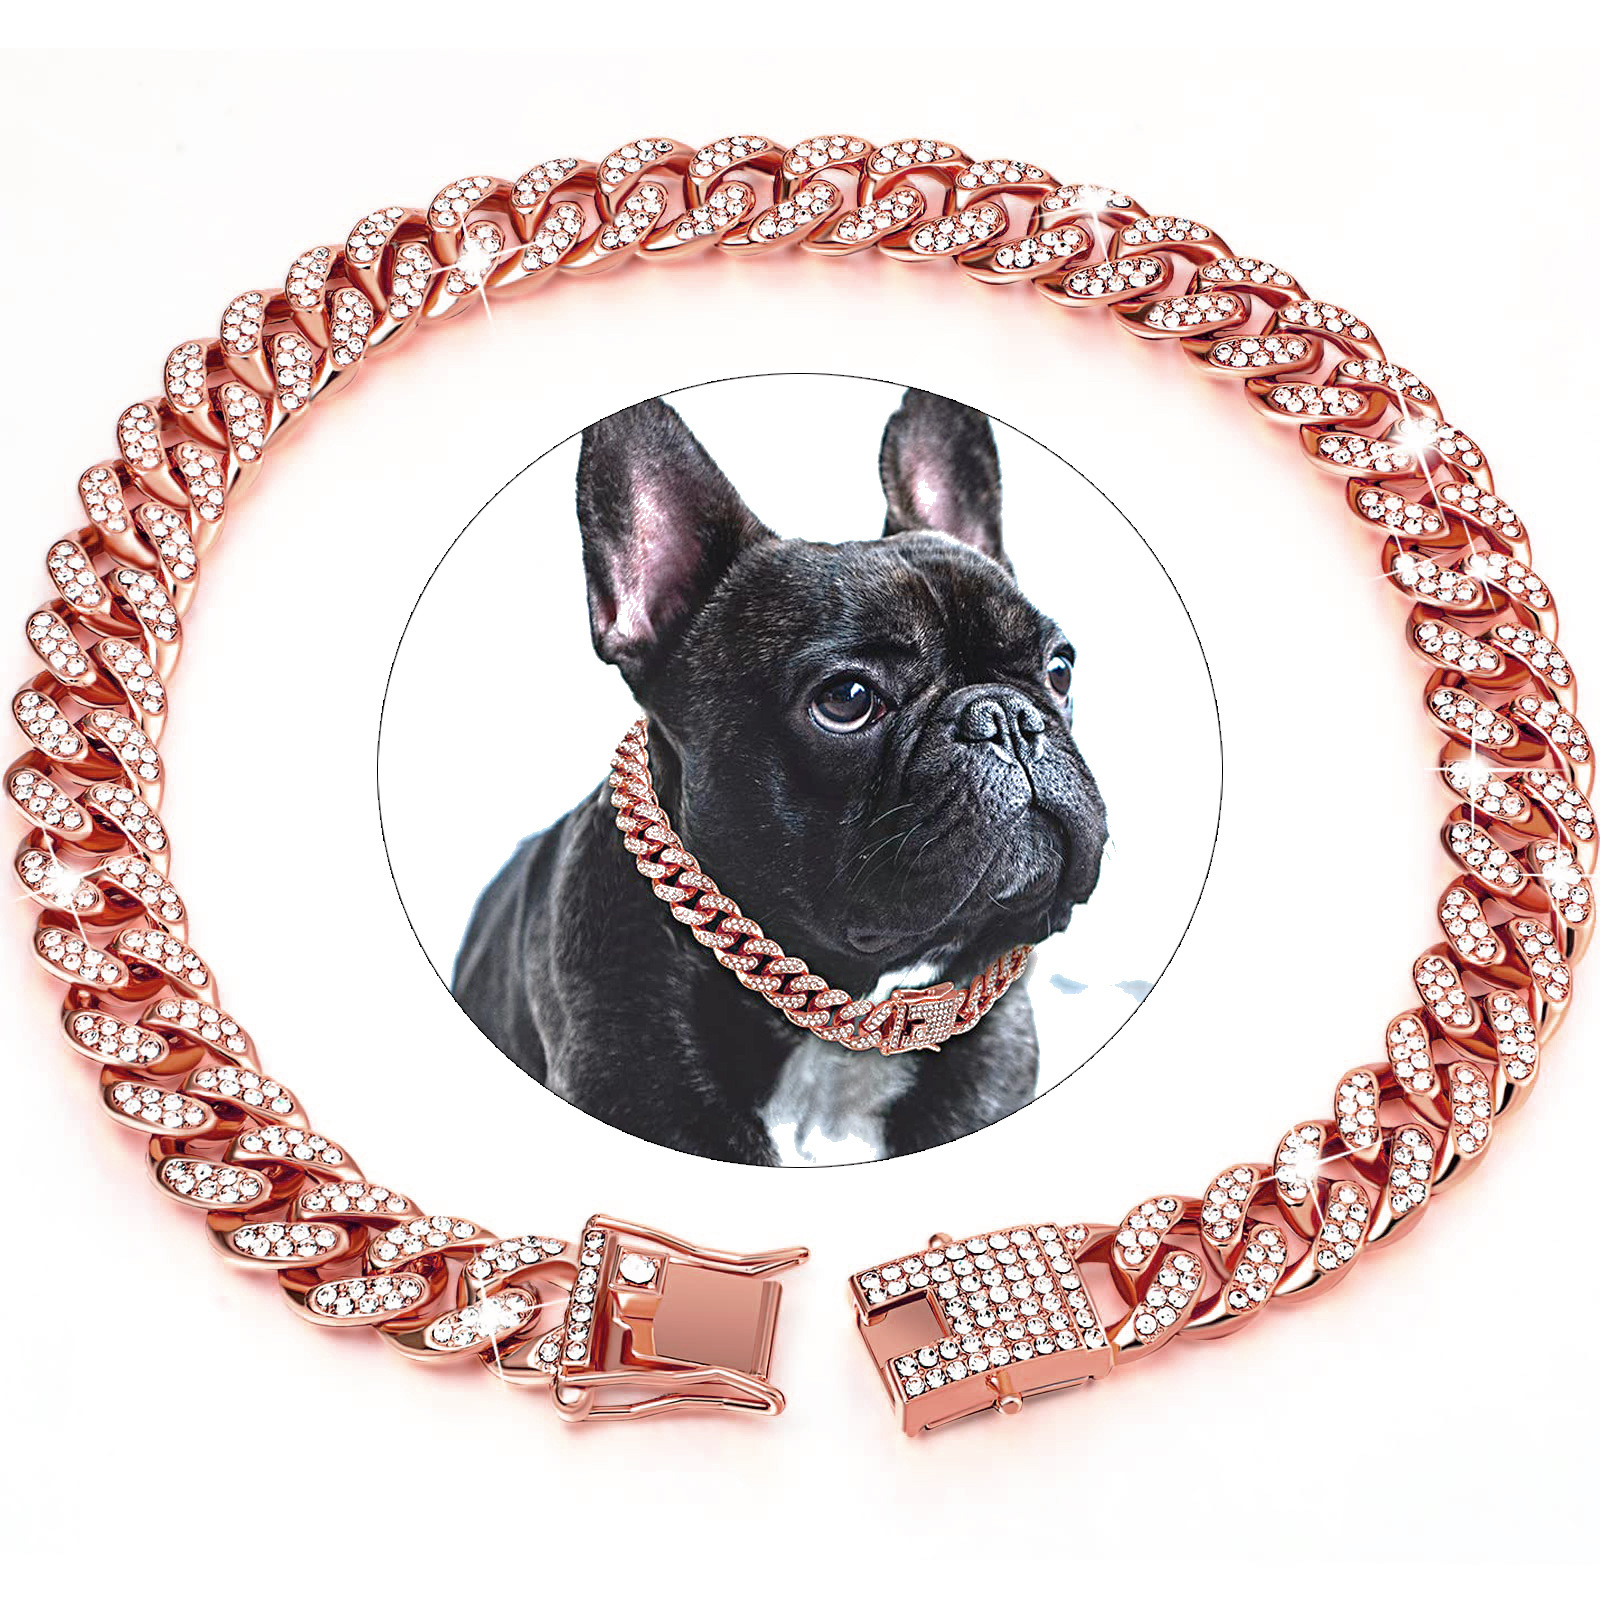 Diamond Dog collars set with 8 rows of sparkling crystal cut stones.